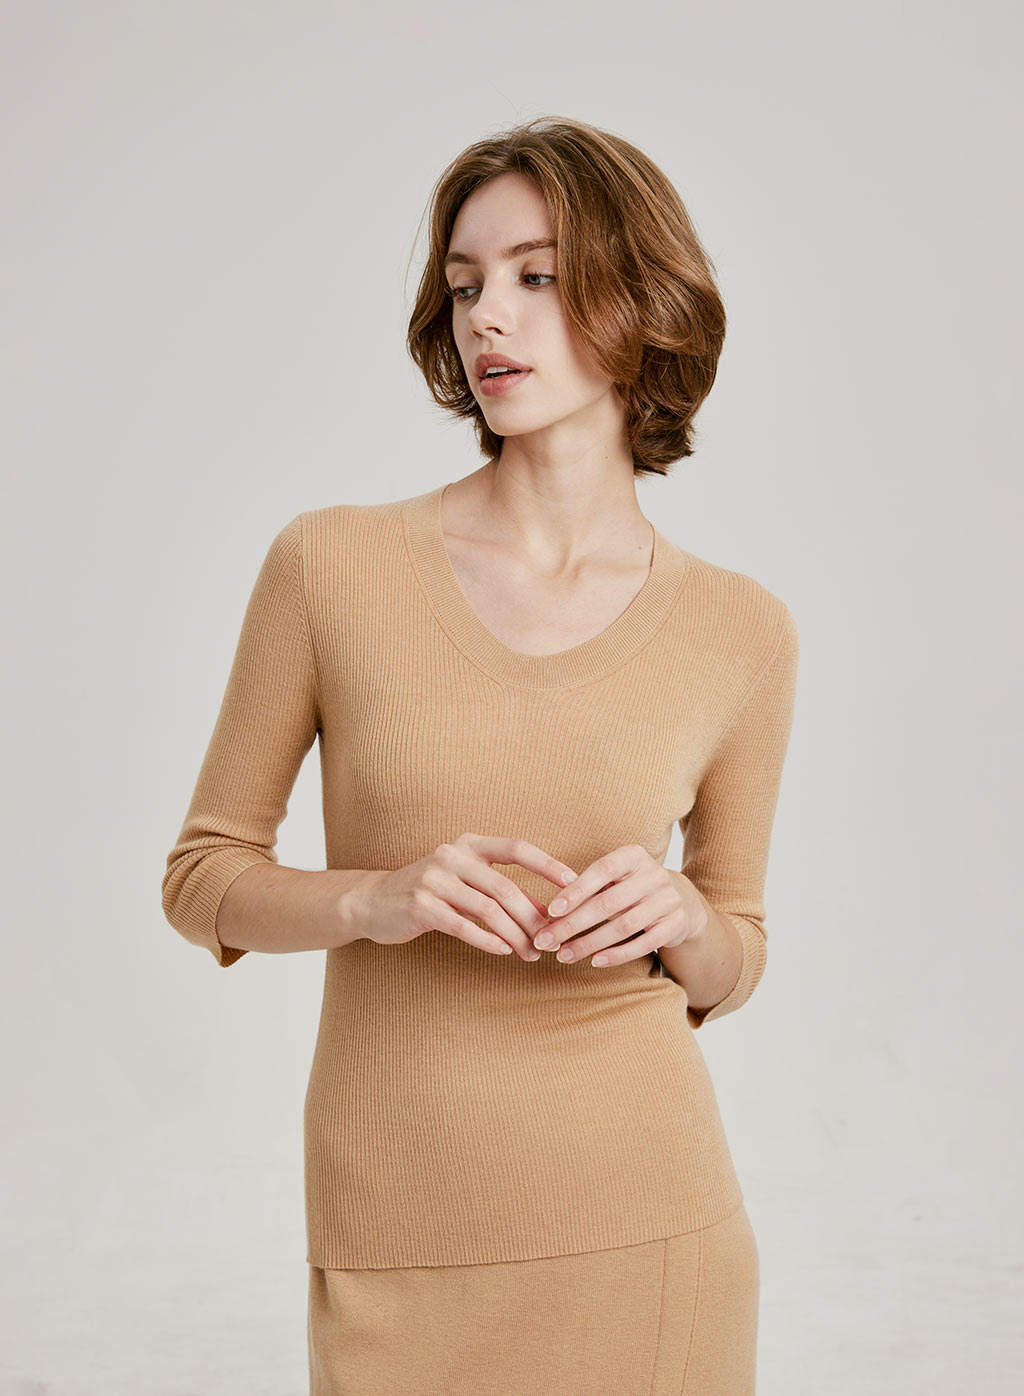 Fitted Long-Sleeve Rib-Knit Top for Women